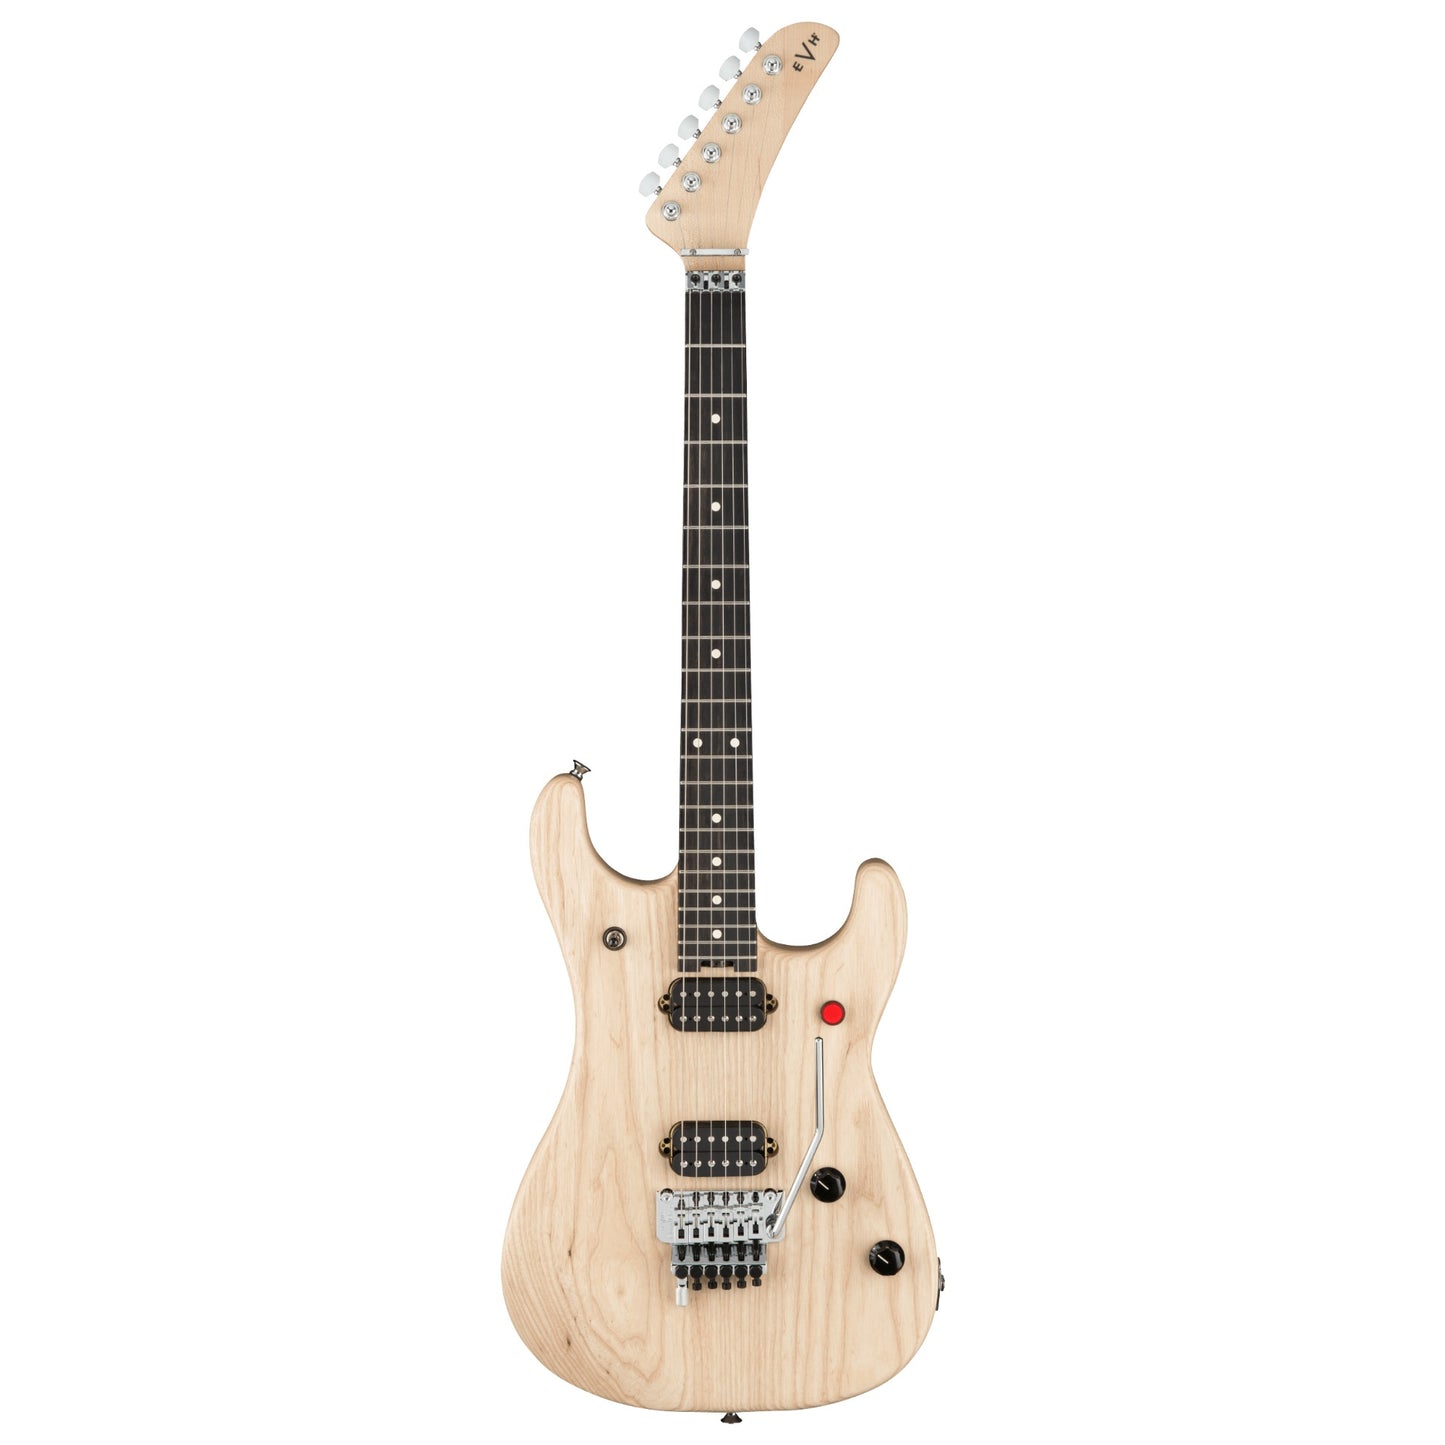 EVH Limited Edition 5150 Deluxe Ash Electric Guitar Natural